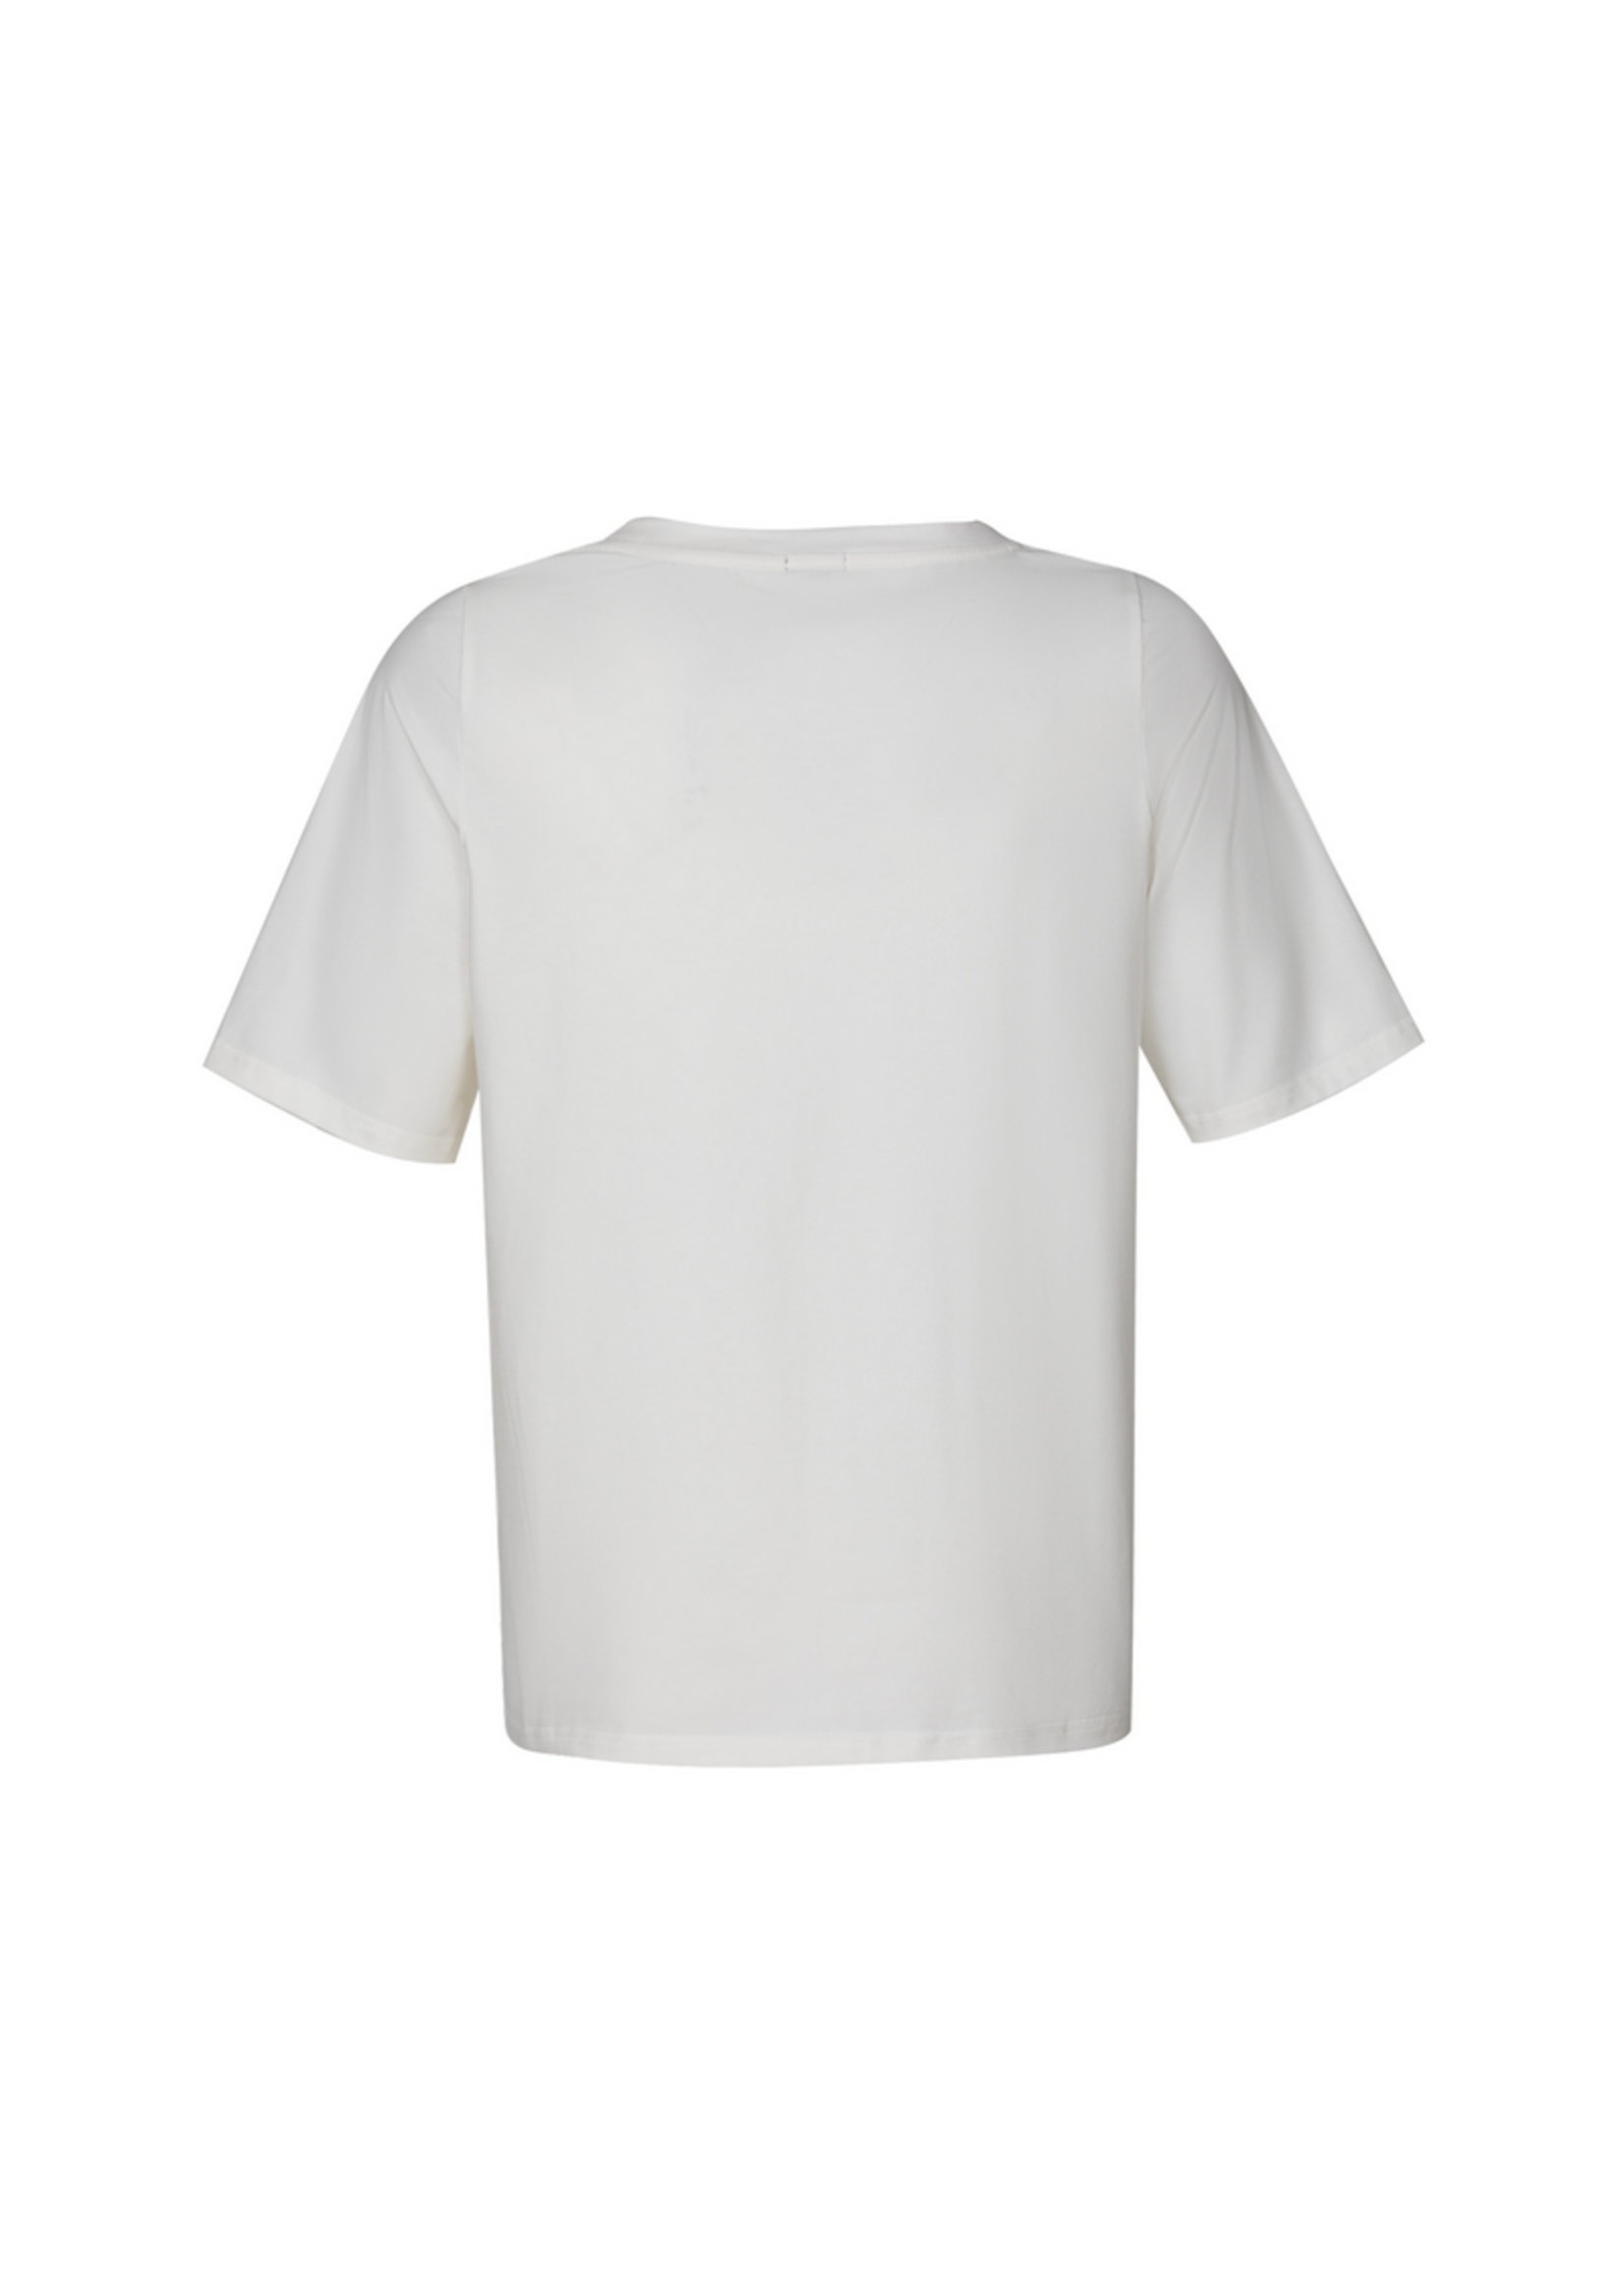 Exxcellent Fay T-shirt Offwhite/Saffierblauw